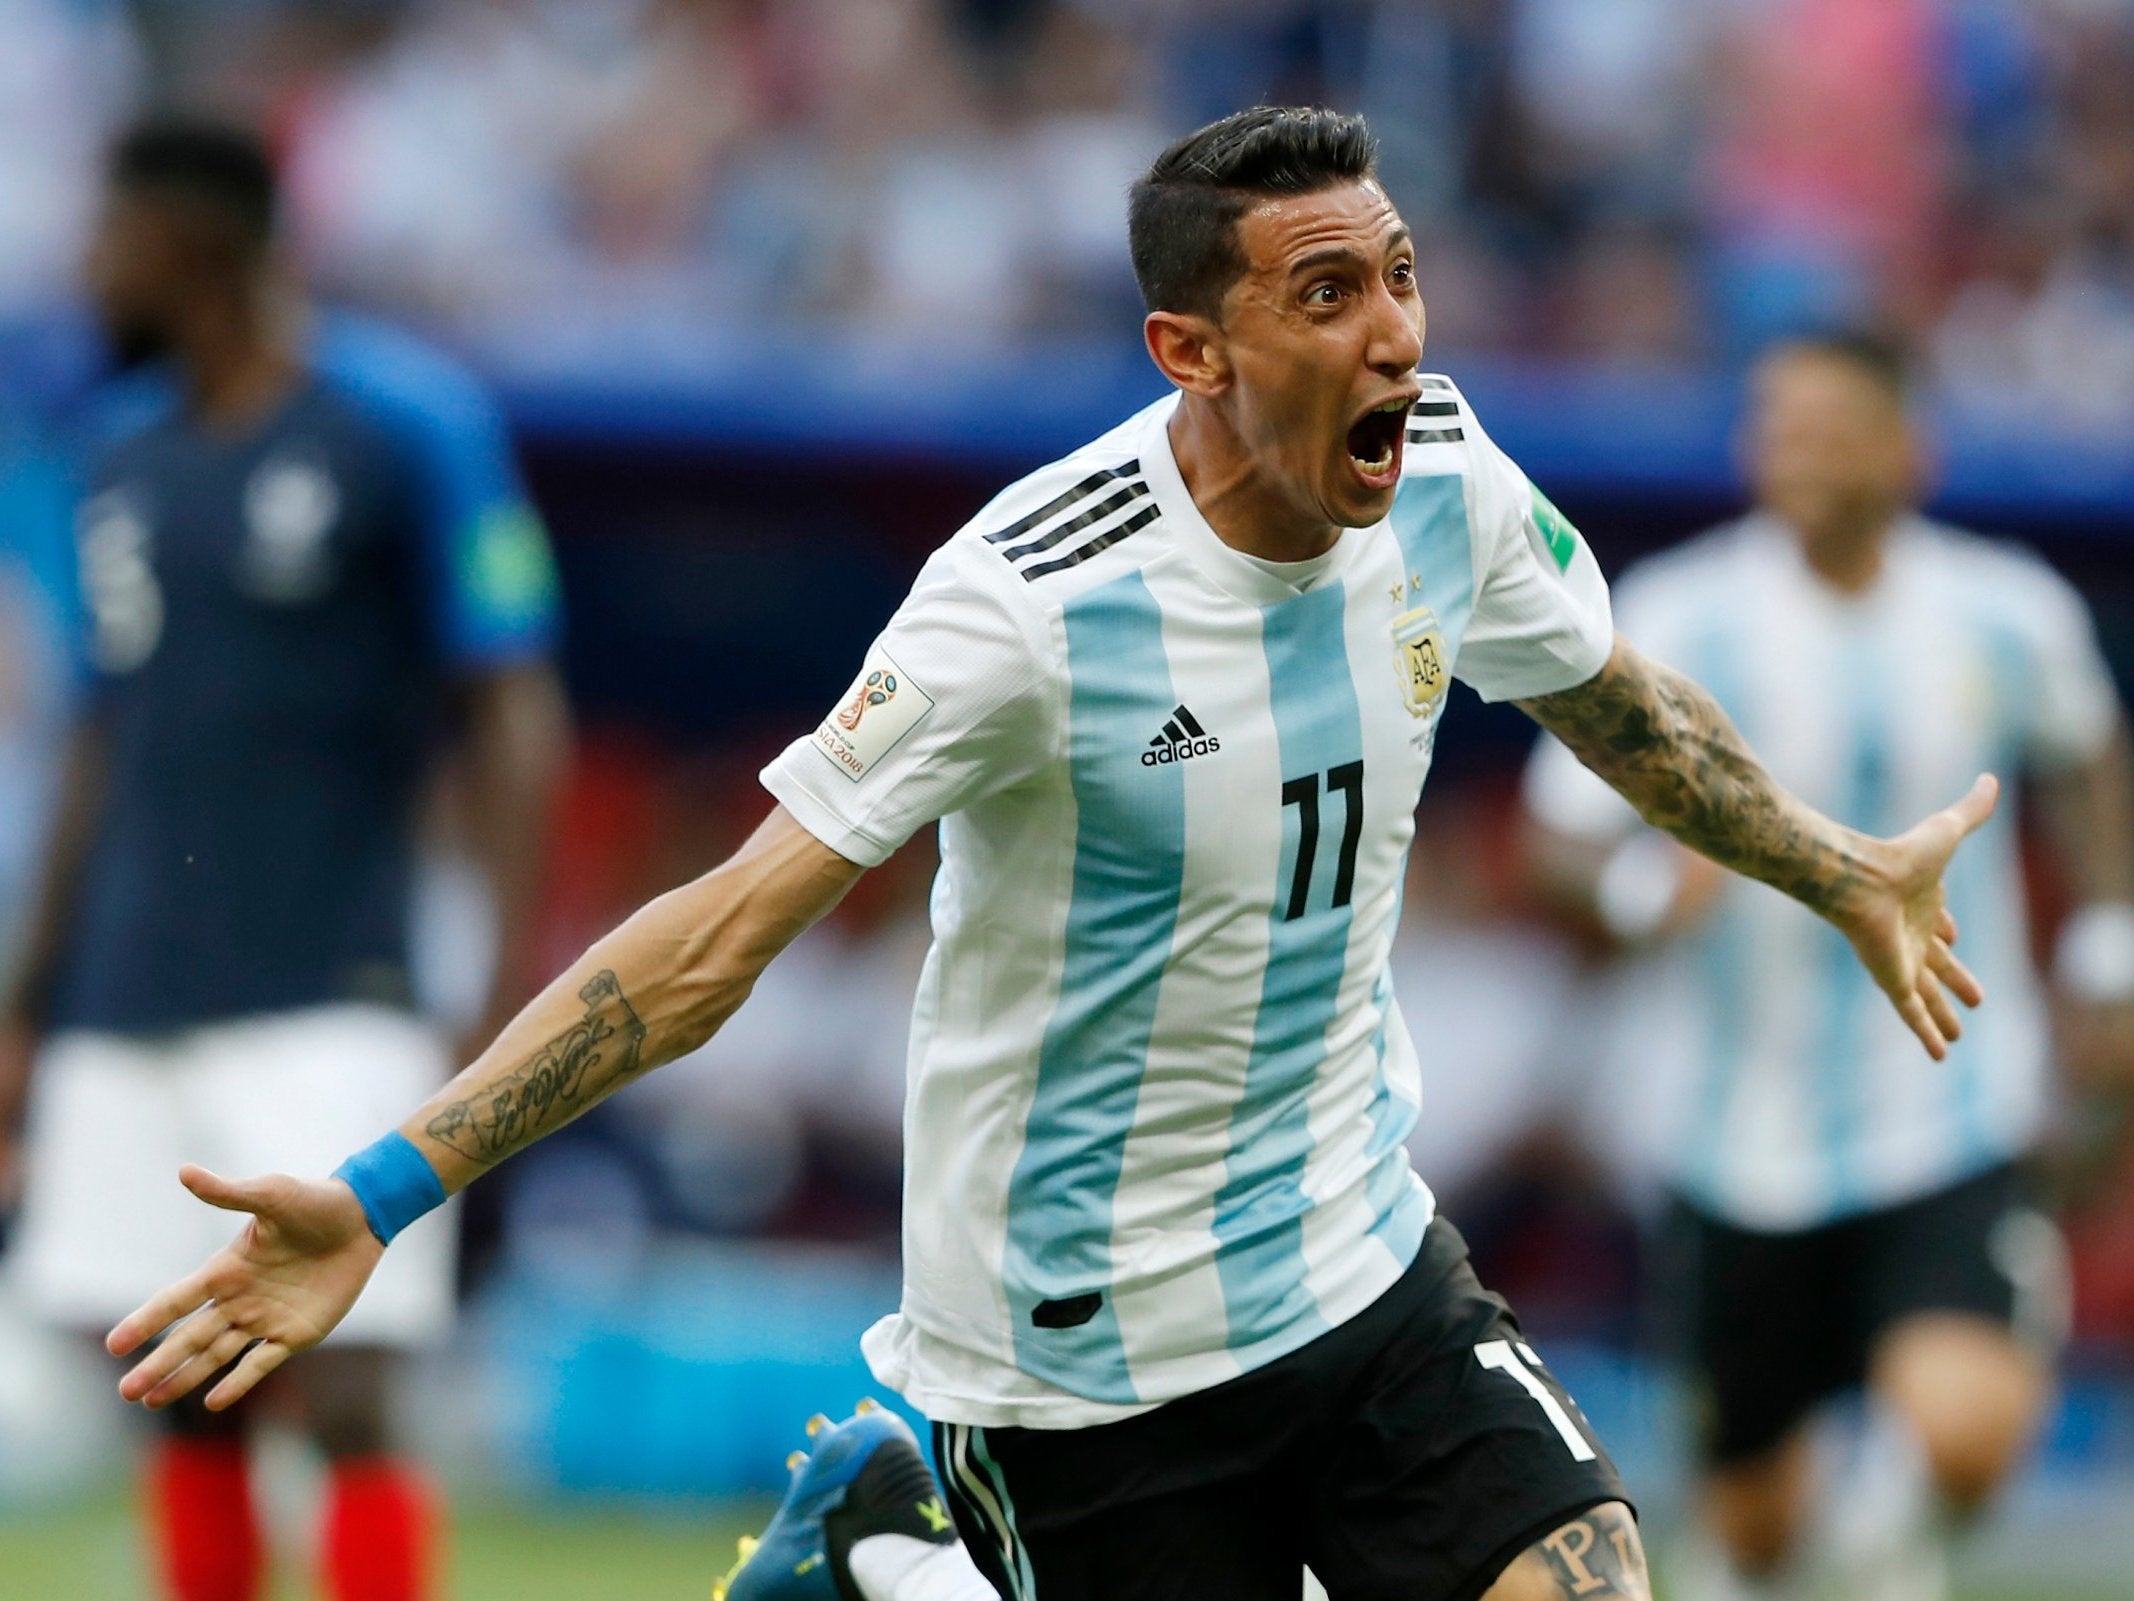 Di Maria dragged Argentina back into the game